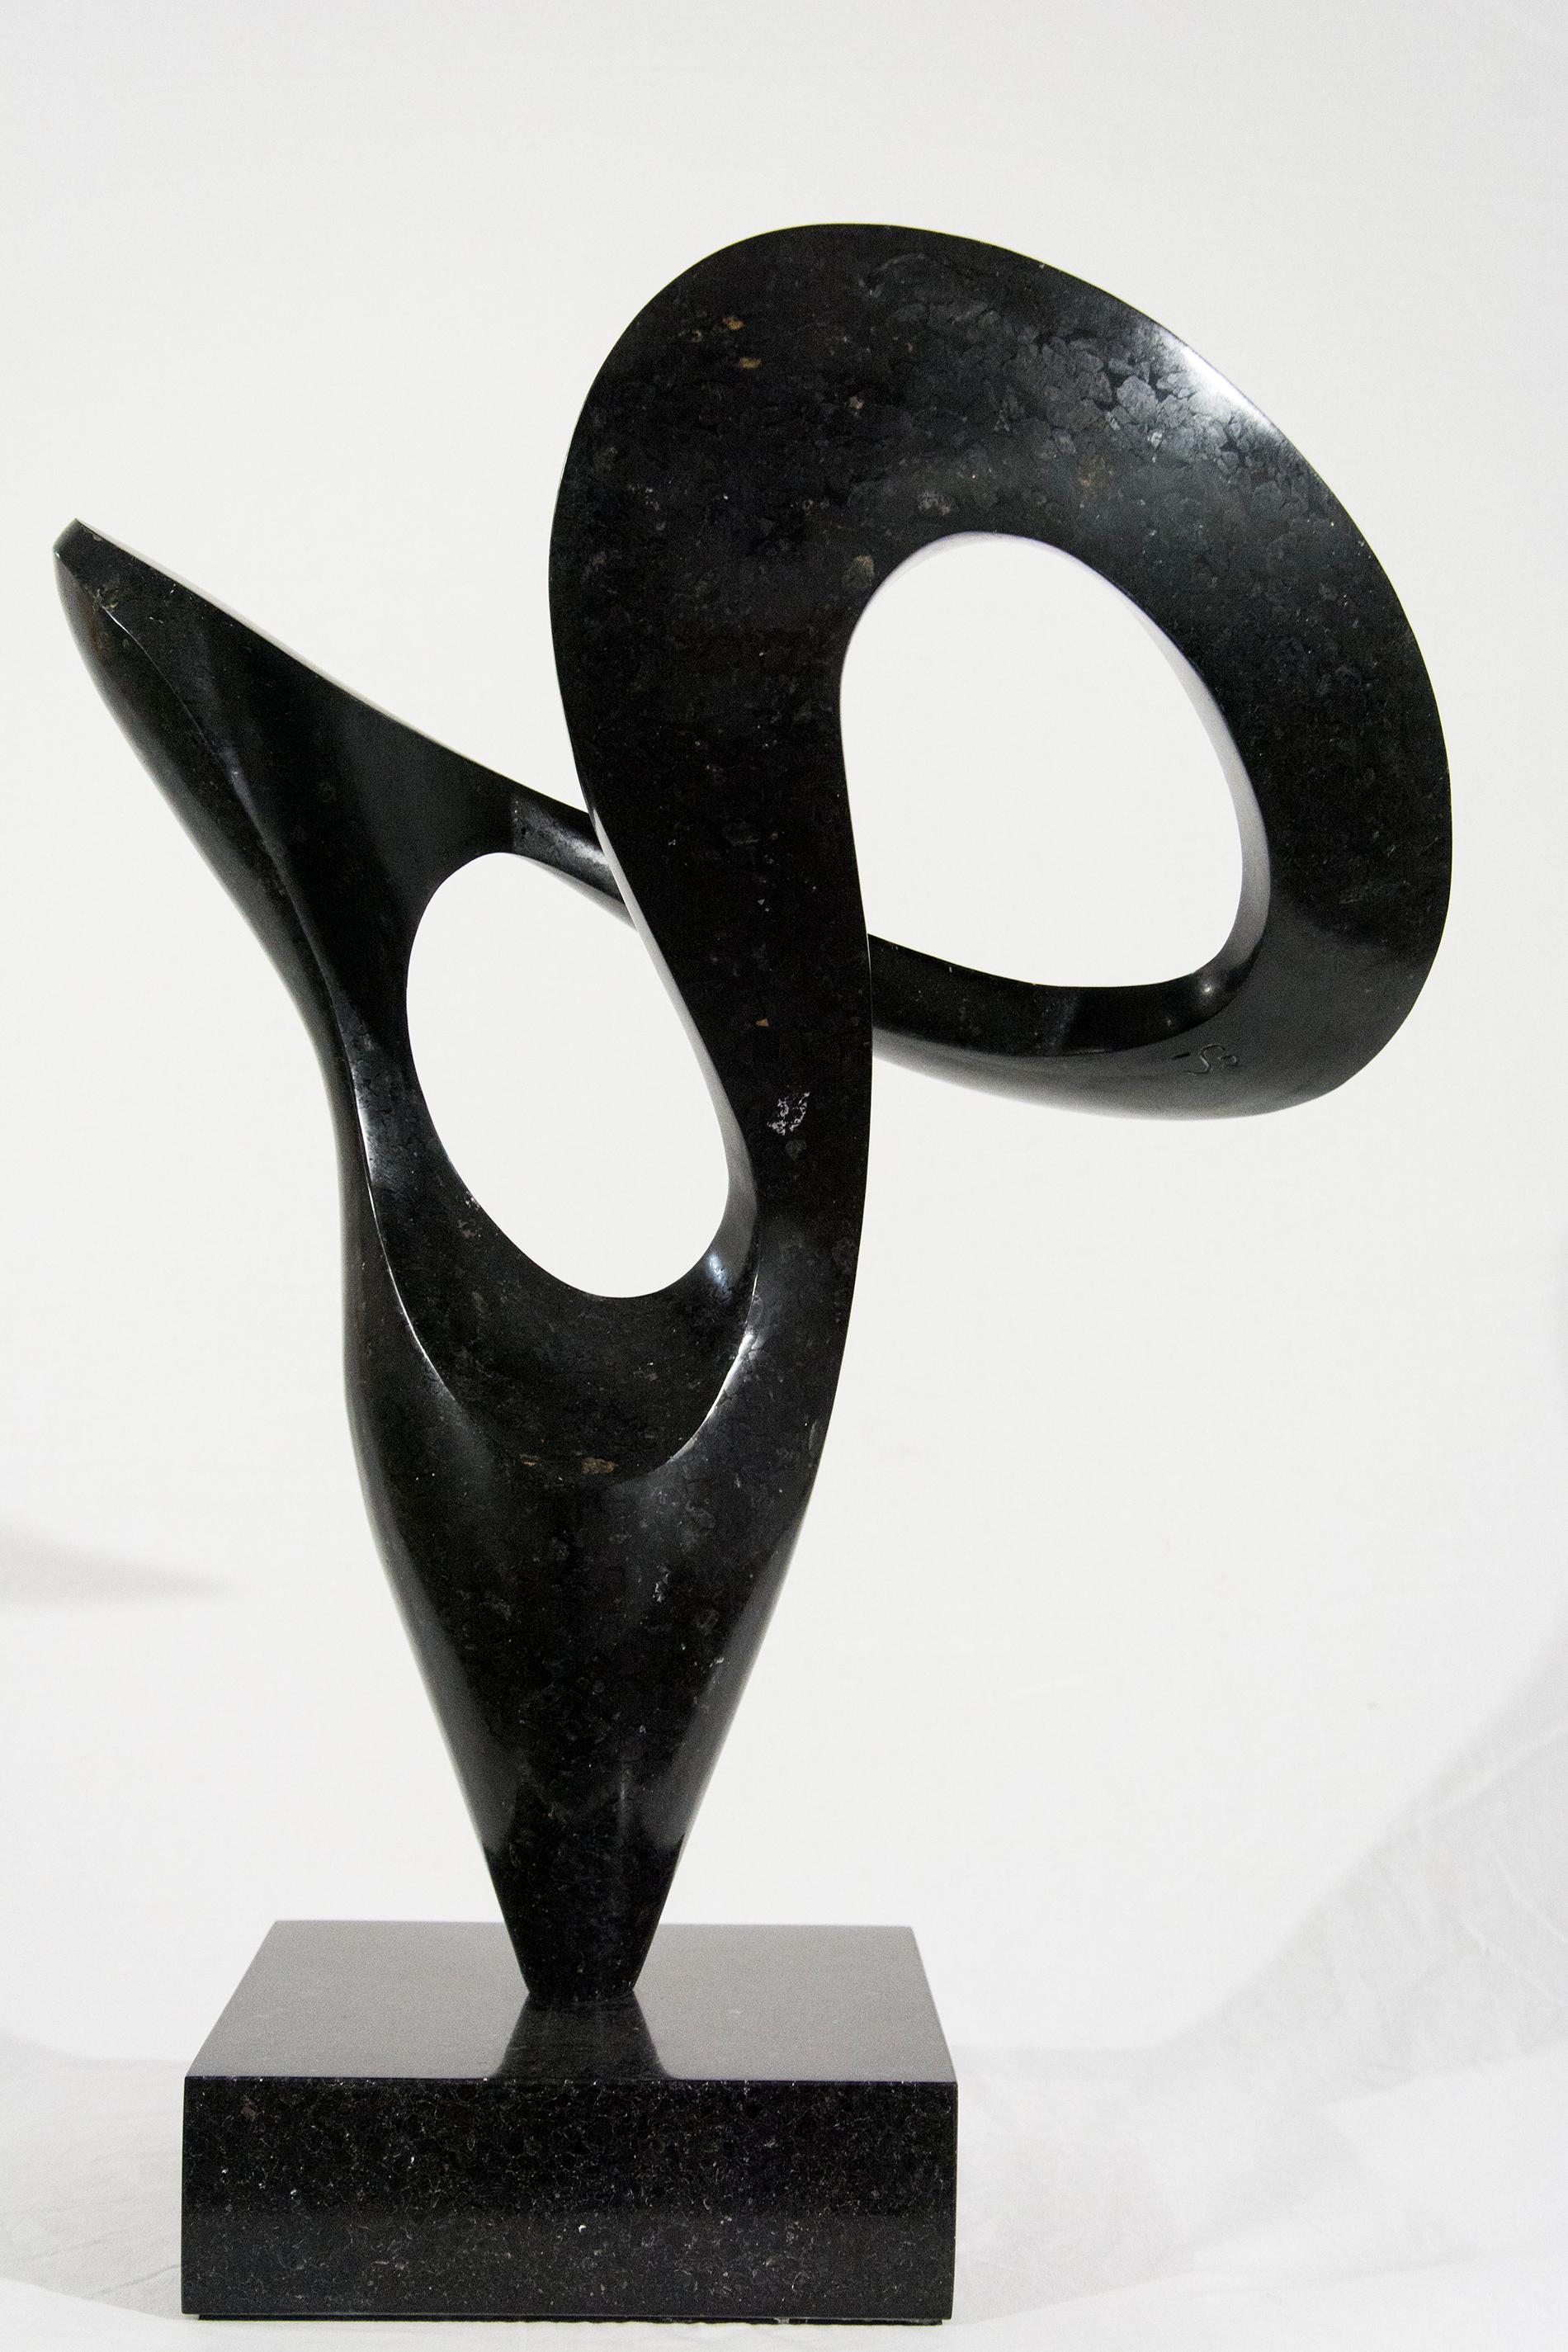 Pirouette 19/50 - smooth, black, granite, indoor/outdoor, abstract sculpture - Sculpture by Jeremy Guy